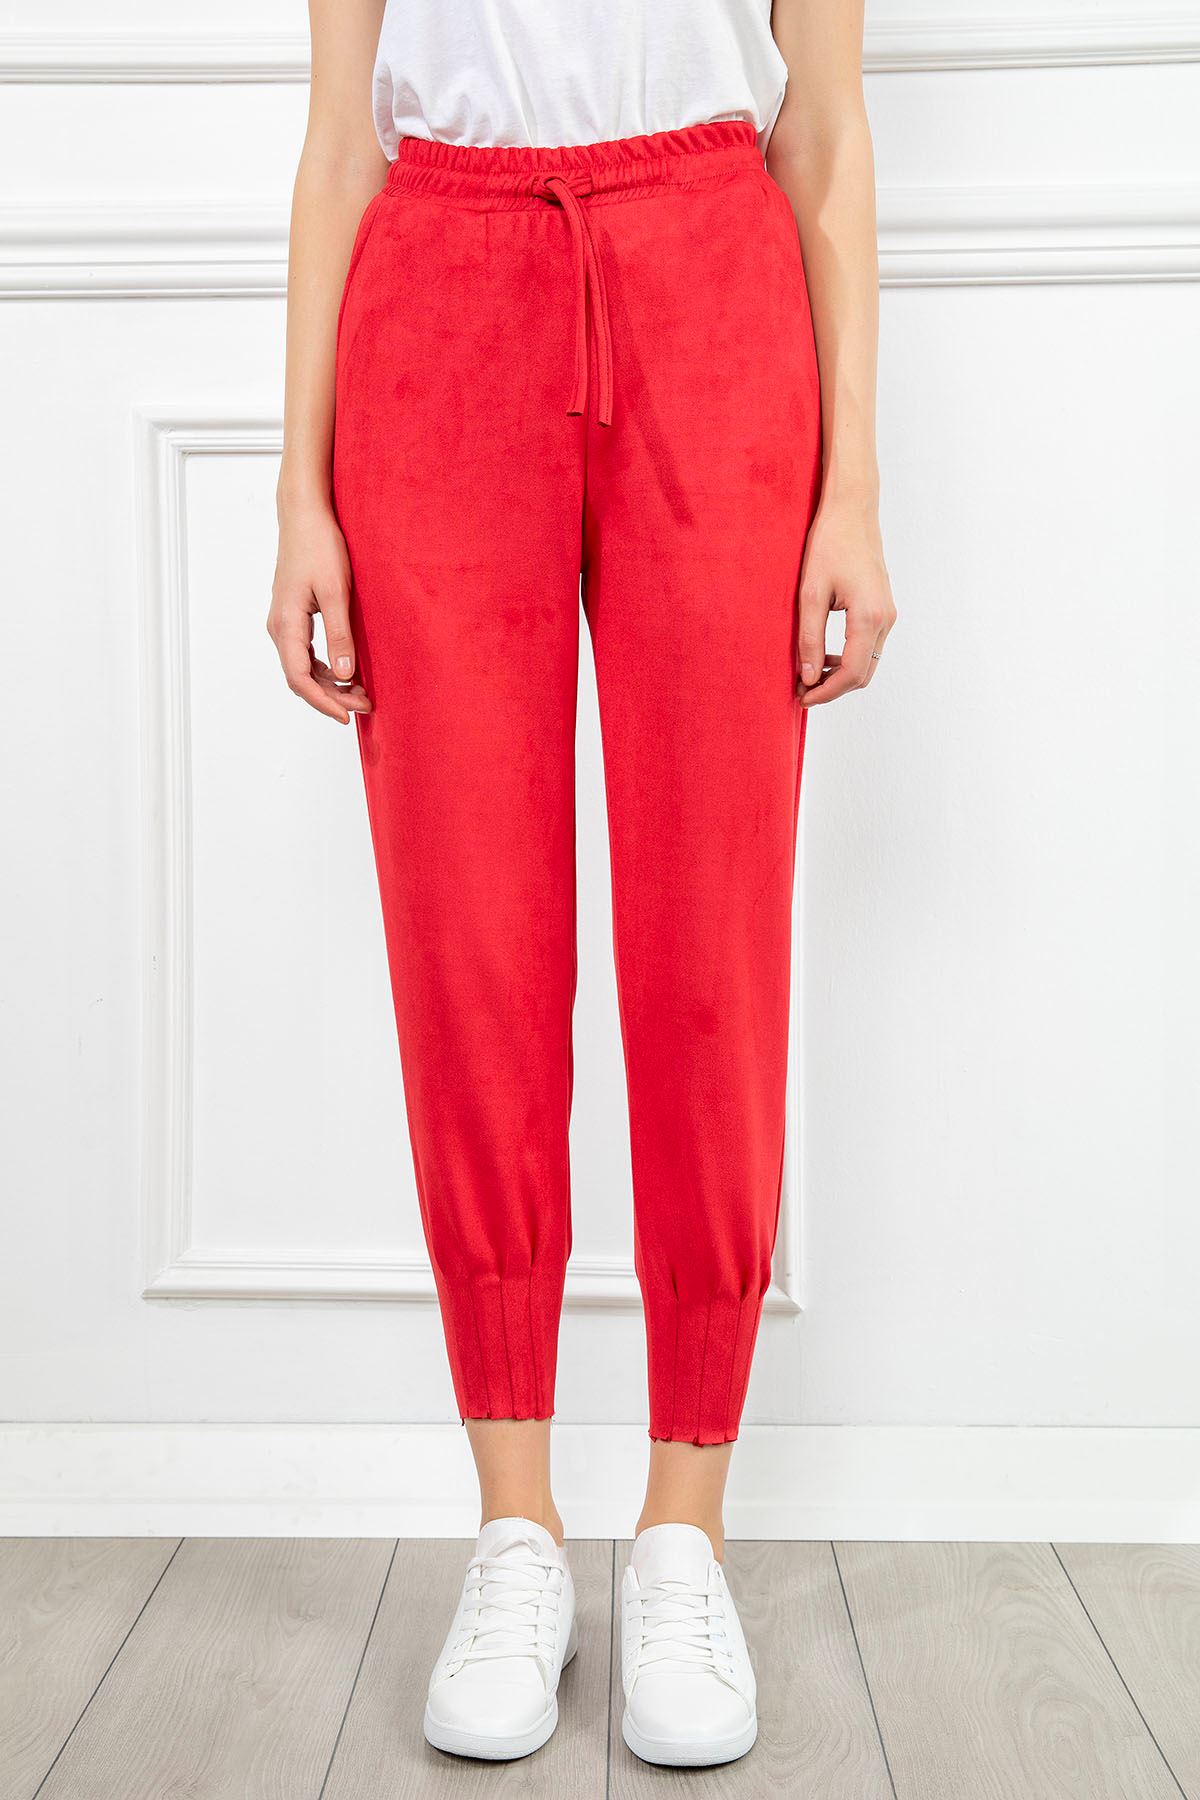 Suede Fabric Tight Fit Slited Women'S Trouser - Red